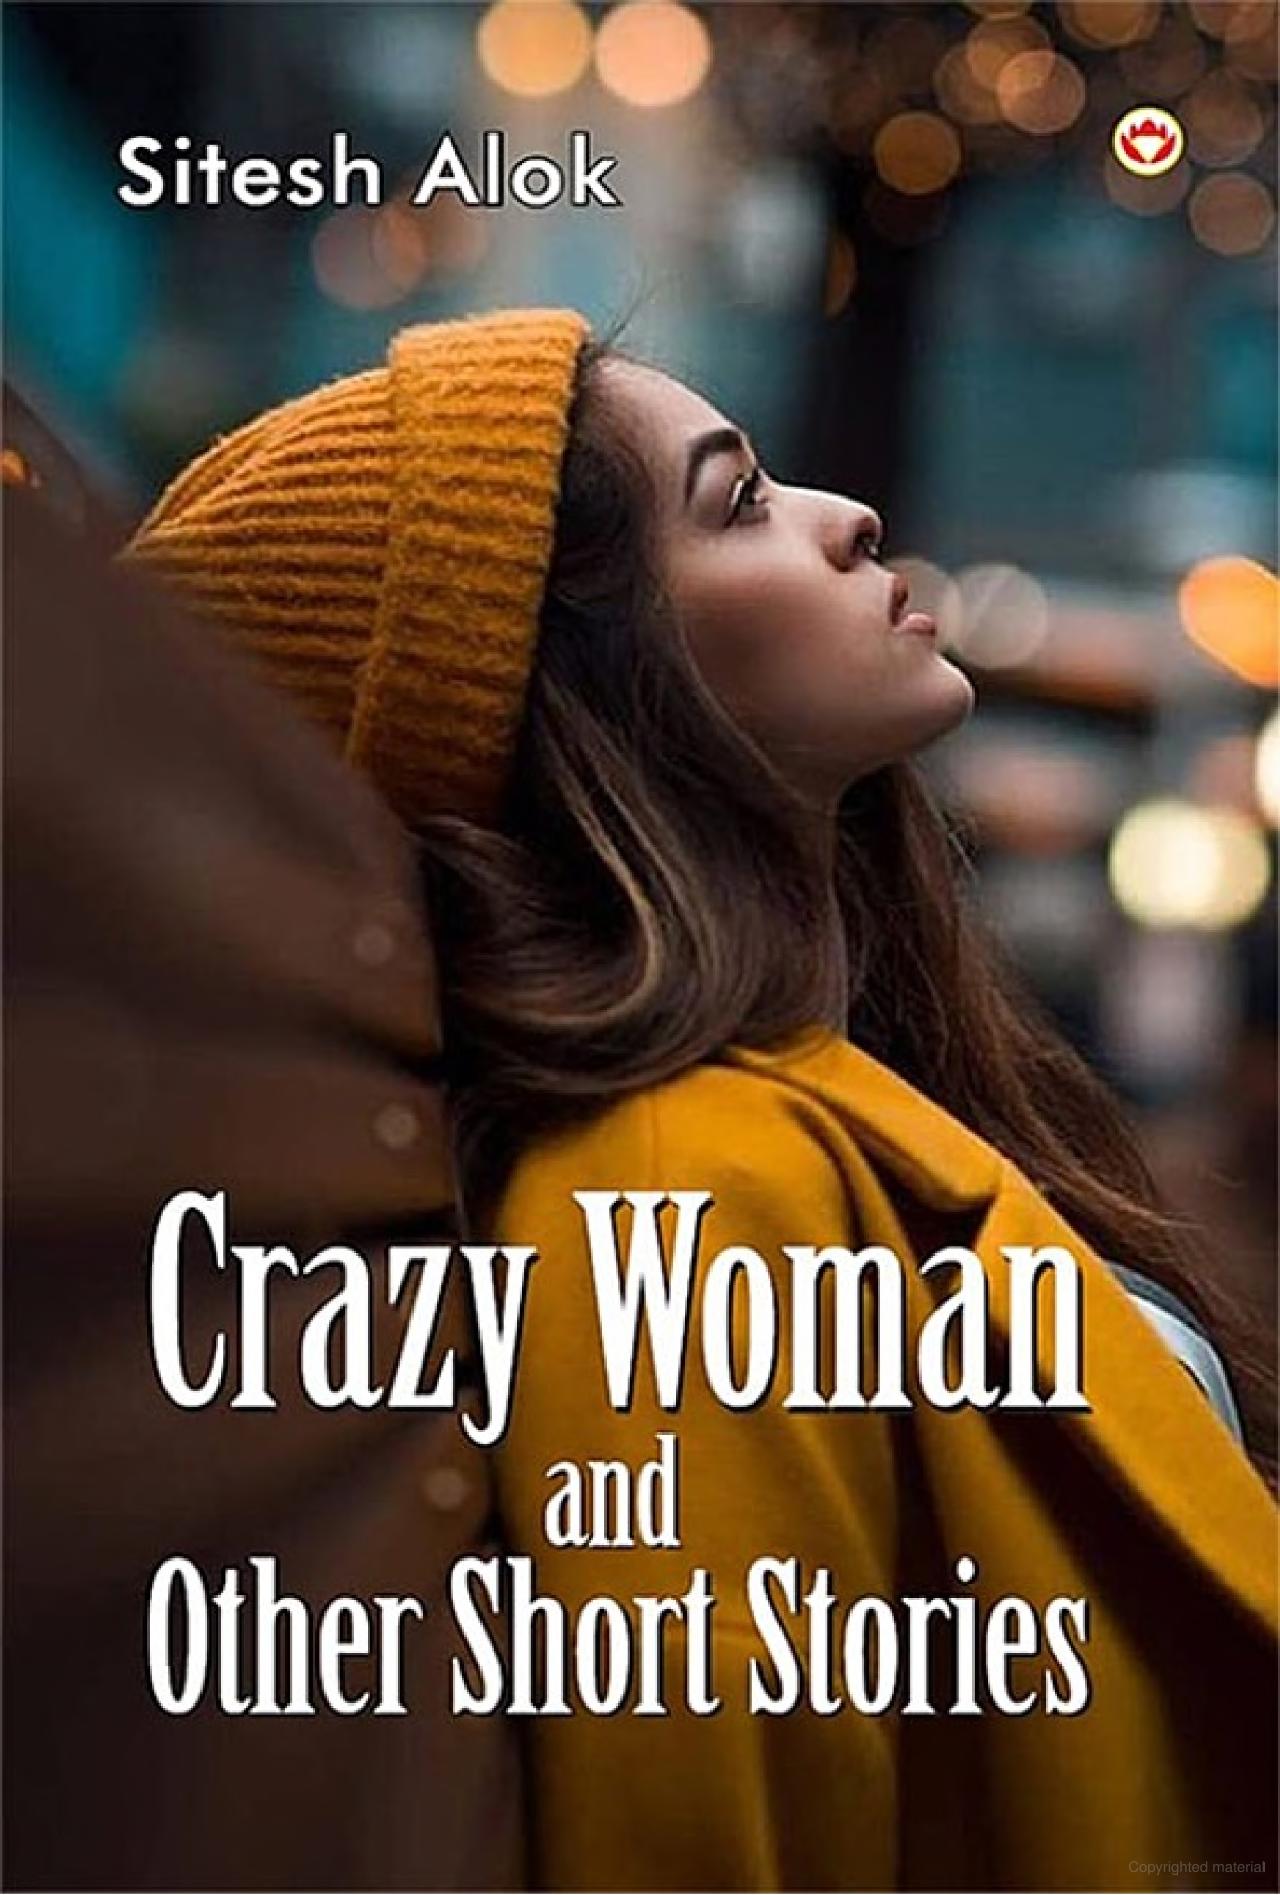 Crazy Woman & Other Short Stories
Book by Sitesh Alok